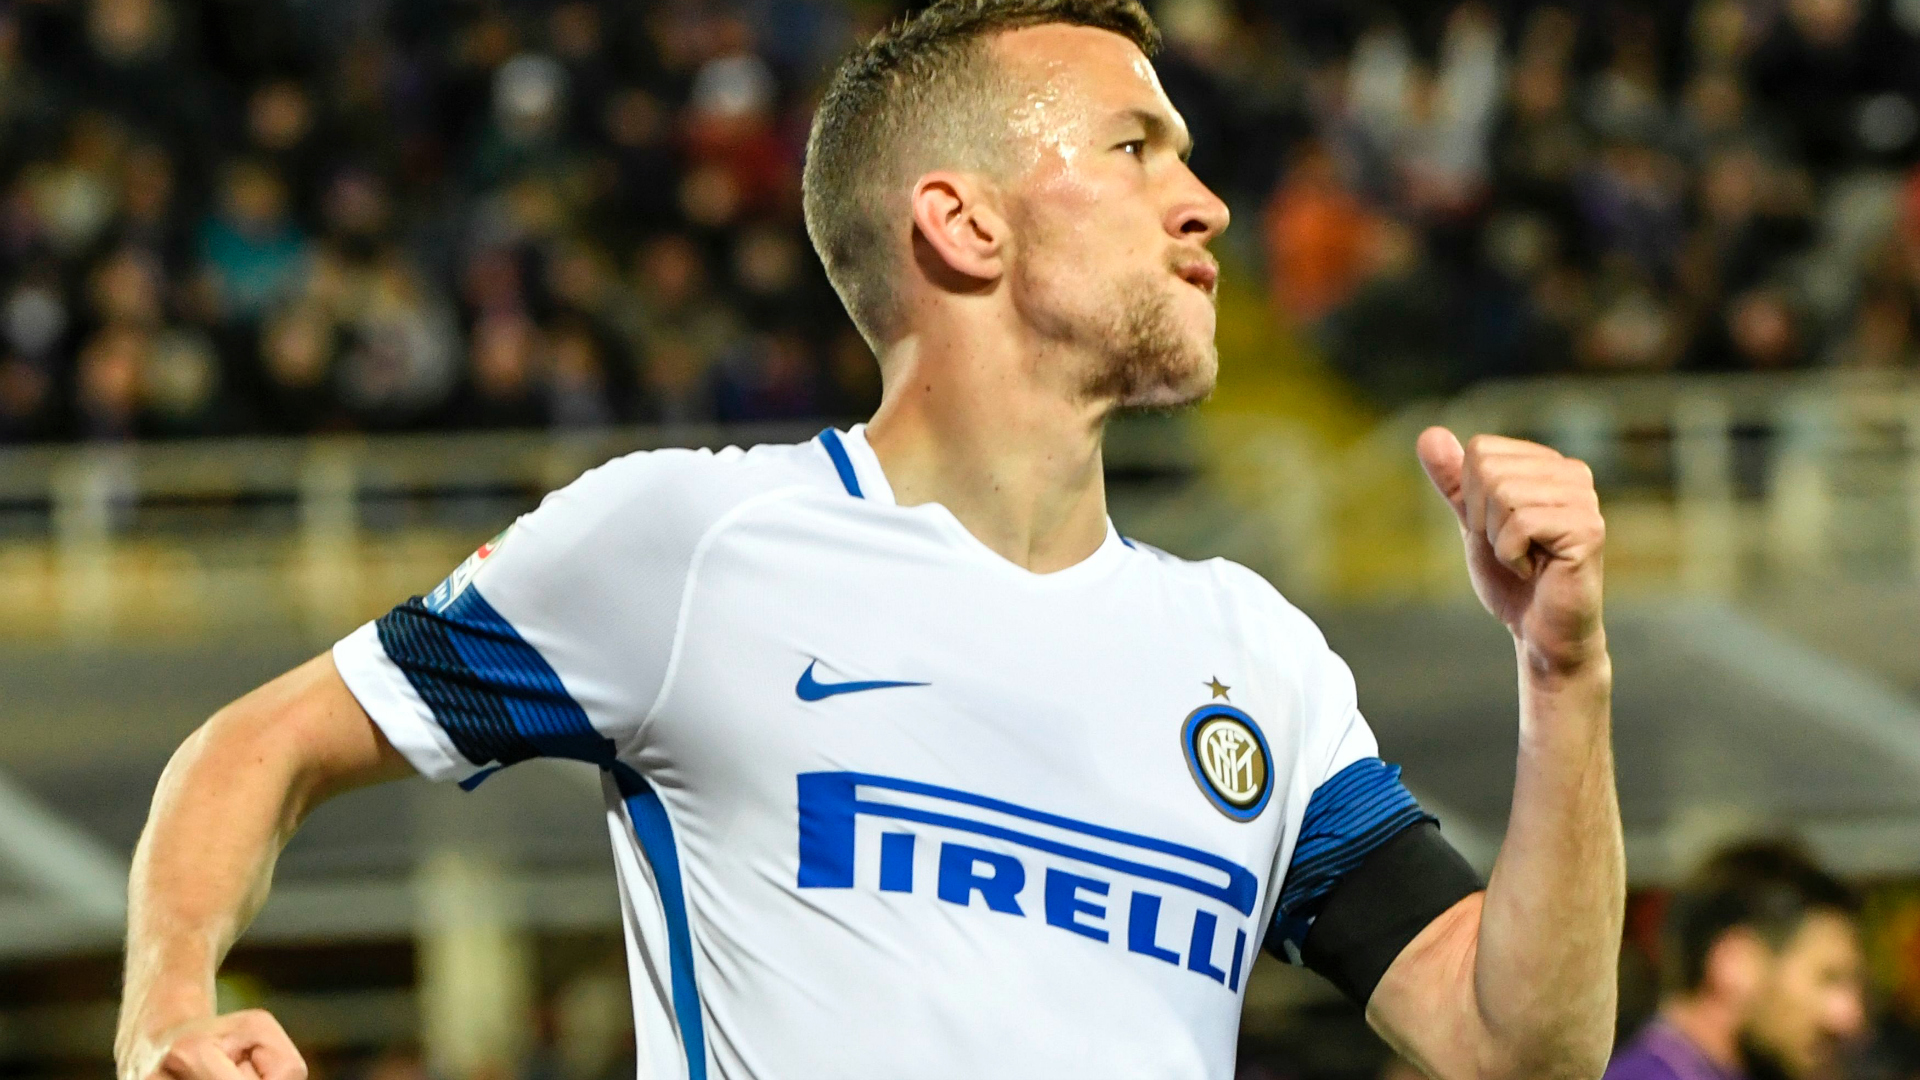 PERISIC WANTS MAN UTD MOVE Perisic-fiorentina-inter-serie-a_wxmdnwhy3sie1pmpd51nxizzs